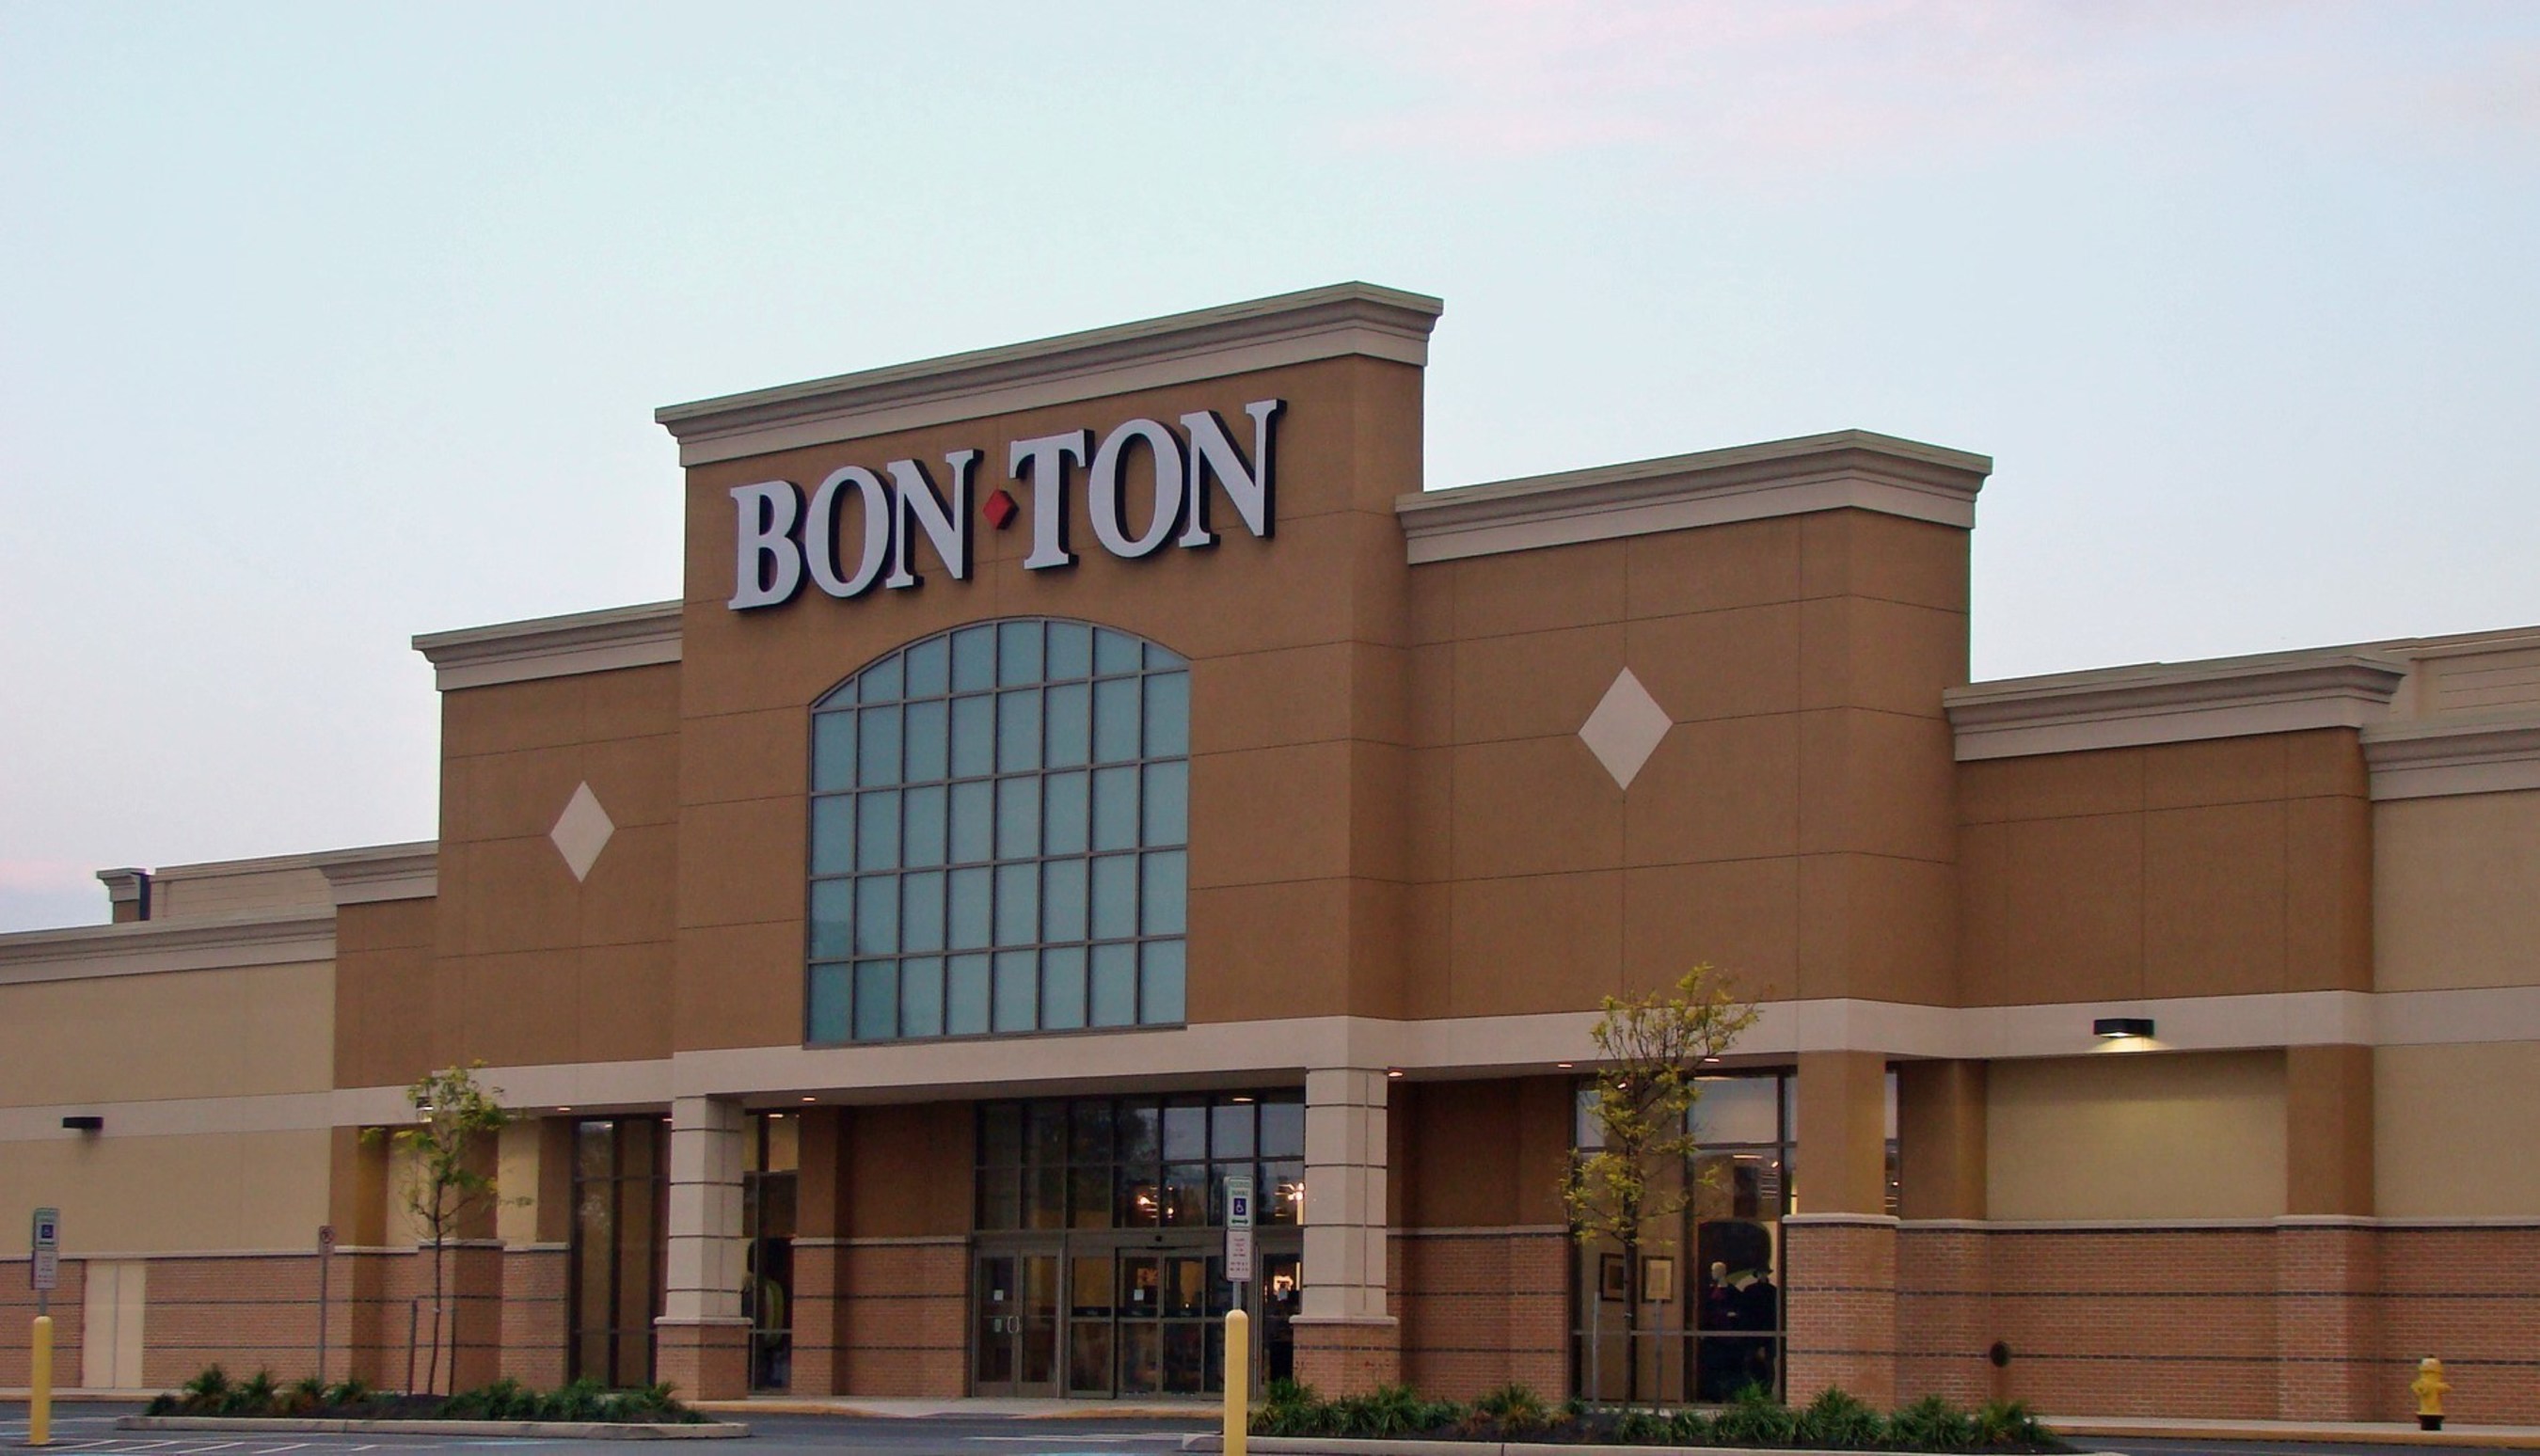 CPA:17 - Global acquires a portfolio of six retail properties from The Bon-Ton Stores, Inc. for approximately $88 million. Three of the properties are located in Milwaukee, Wisconsin, and the remaining three are located in Green Bay, Wisconsin; Fargo, North Dakota; and Joliet, Illinois.